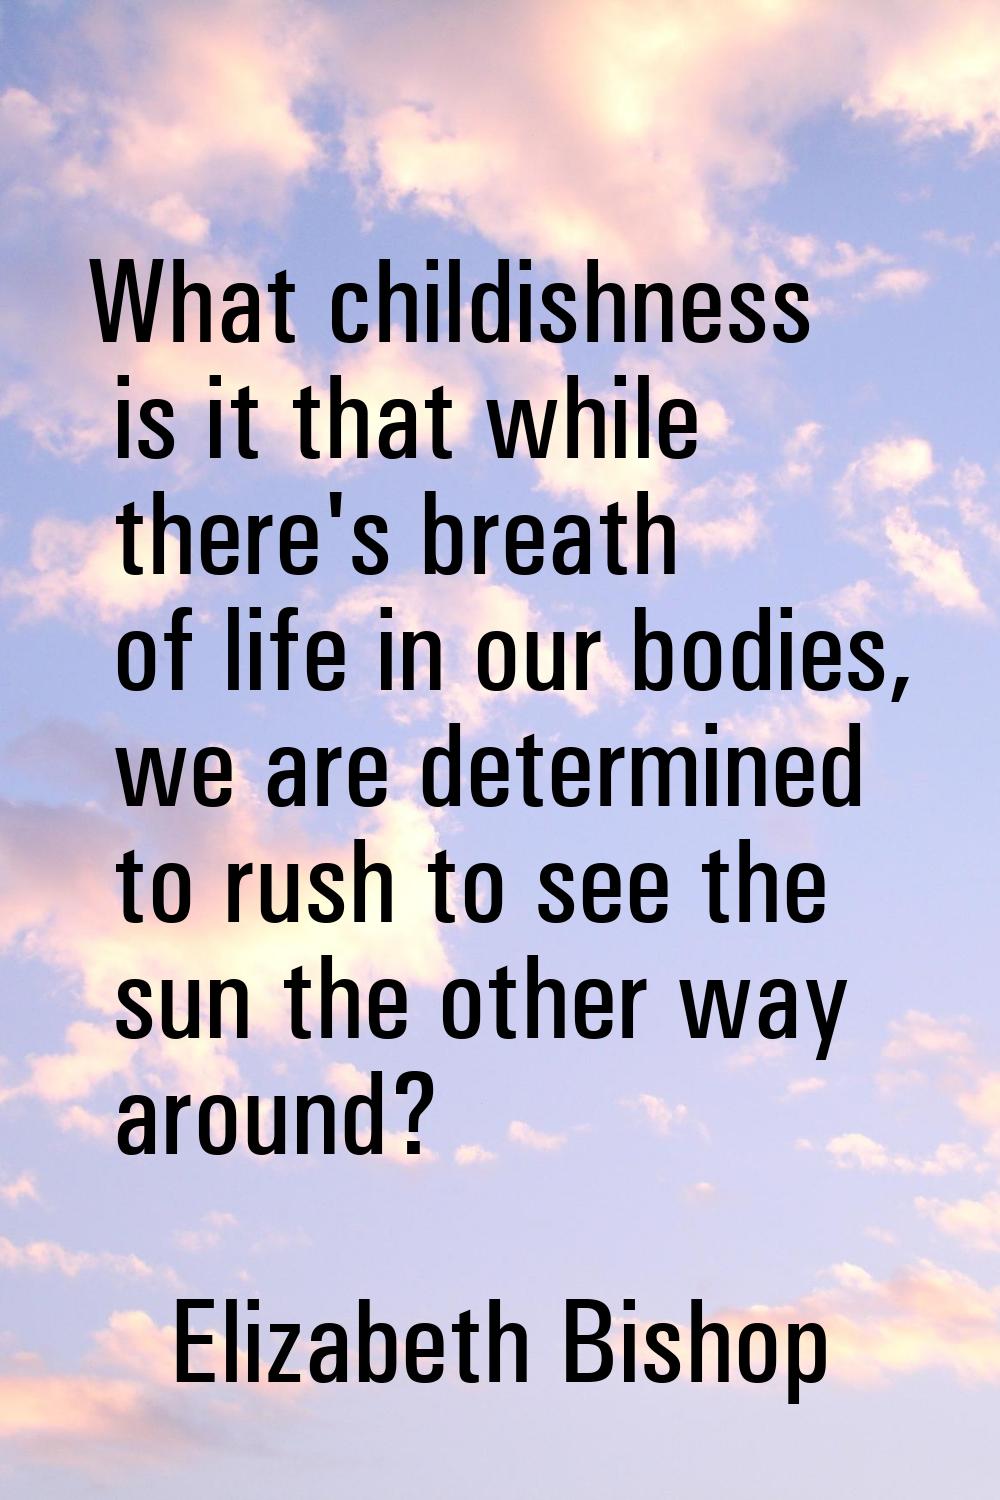 What childishness is it that while there's breath of life in our bodies, we are determined to rush 